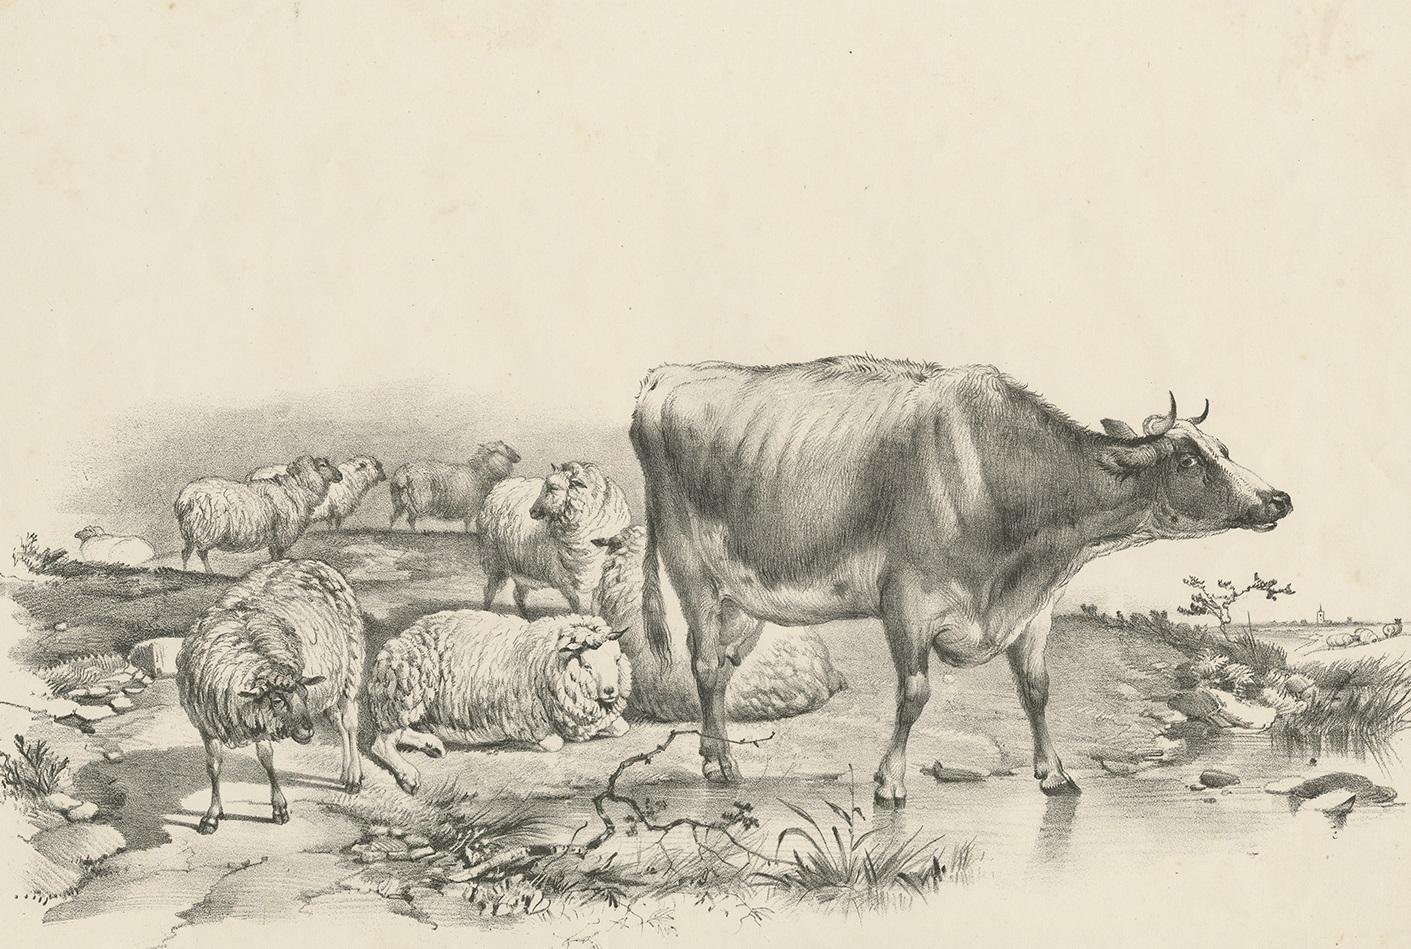 Antique print of various sheep and a cow. This print originates from 'Cattle Subjects' by Thomas Sidney Cooper. He was an English landscape painter noted for his images of cattle and farm animals.